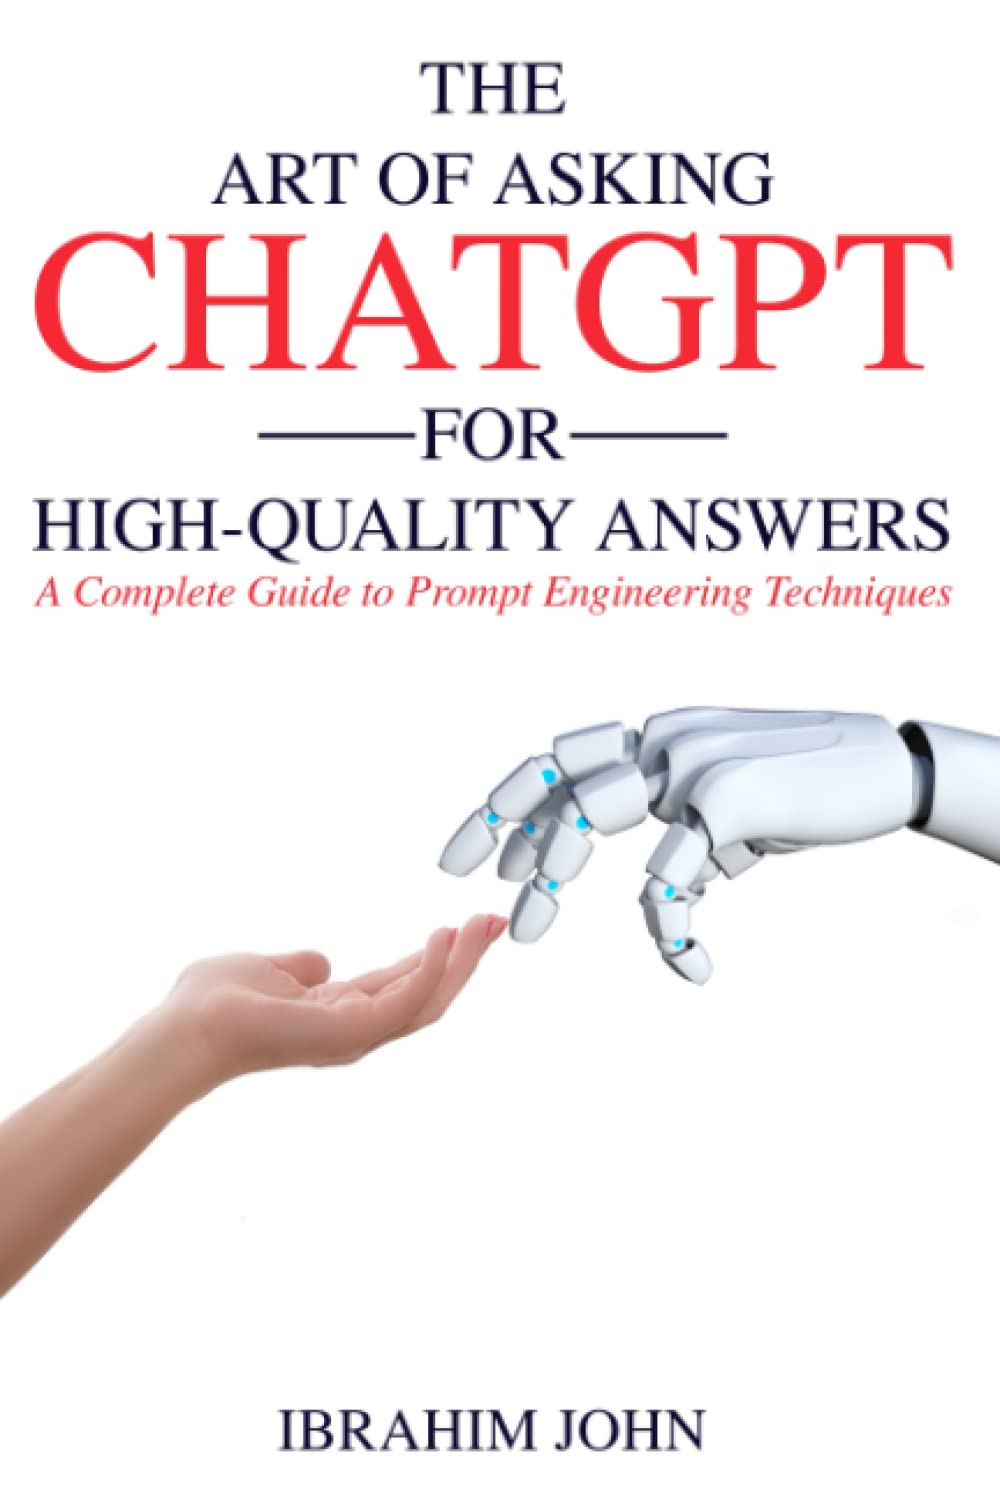 The Art of Asking ChatGPT for High-Quality Answers